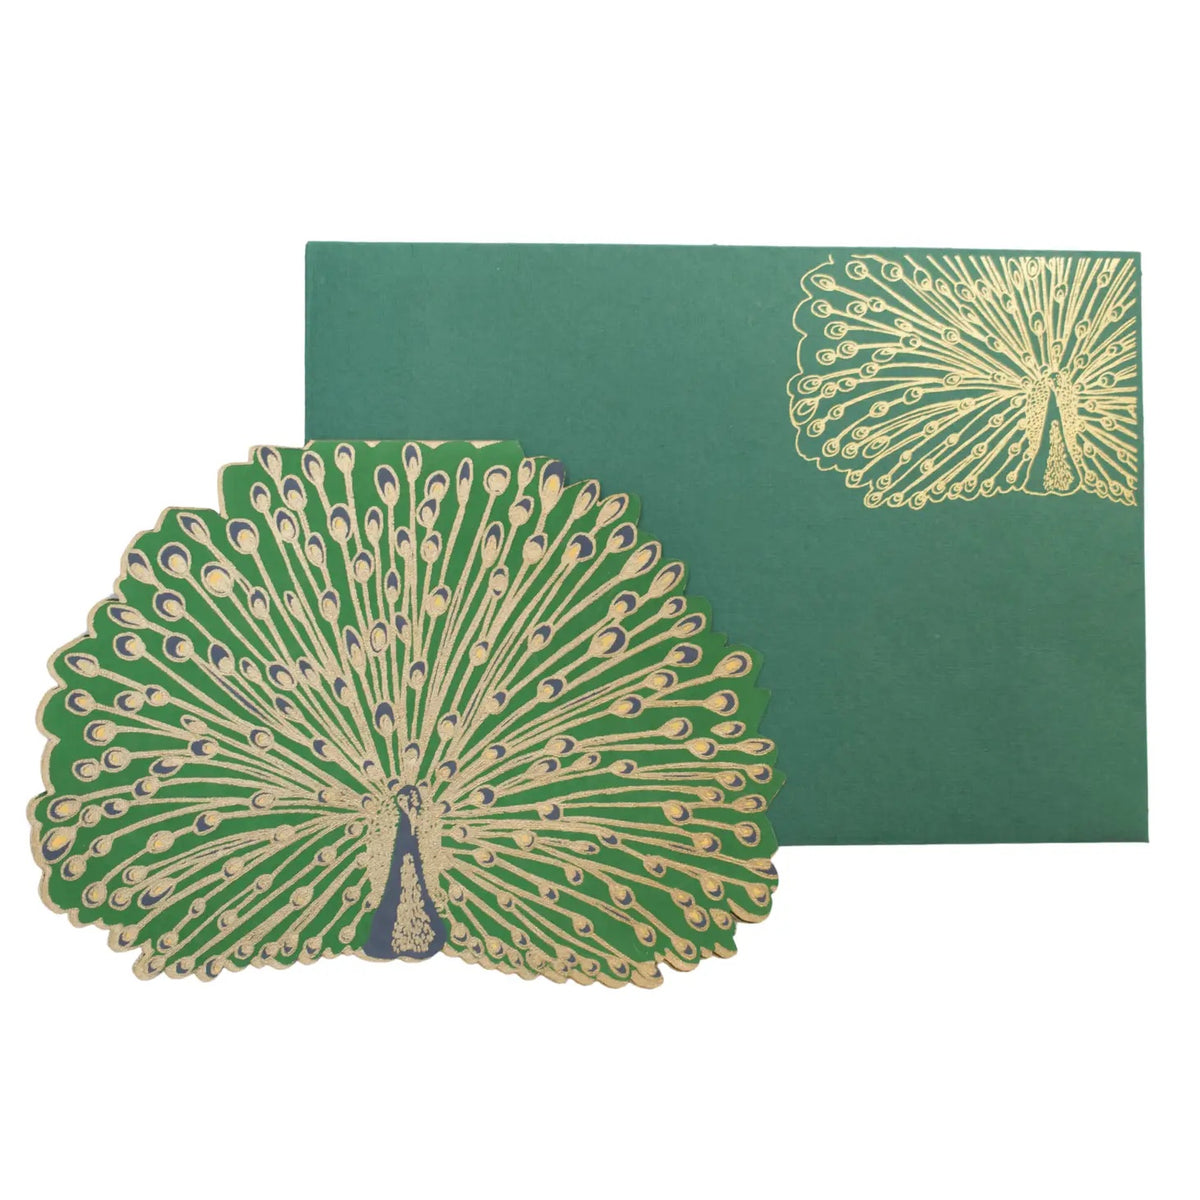 Peacock Greeting Card - east end press - Bluecashew Kitchen Homestead